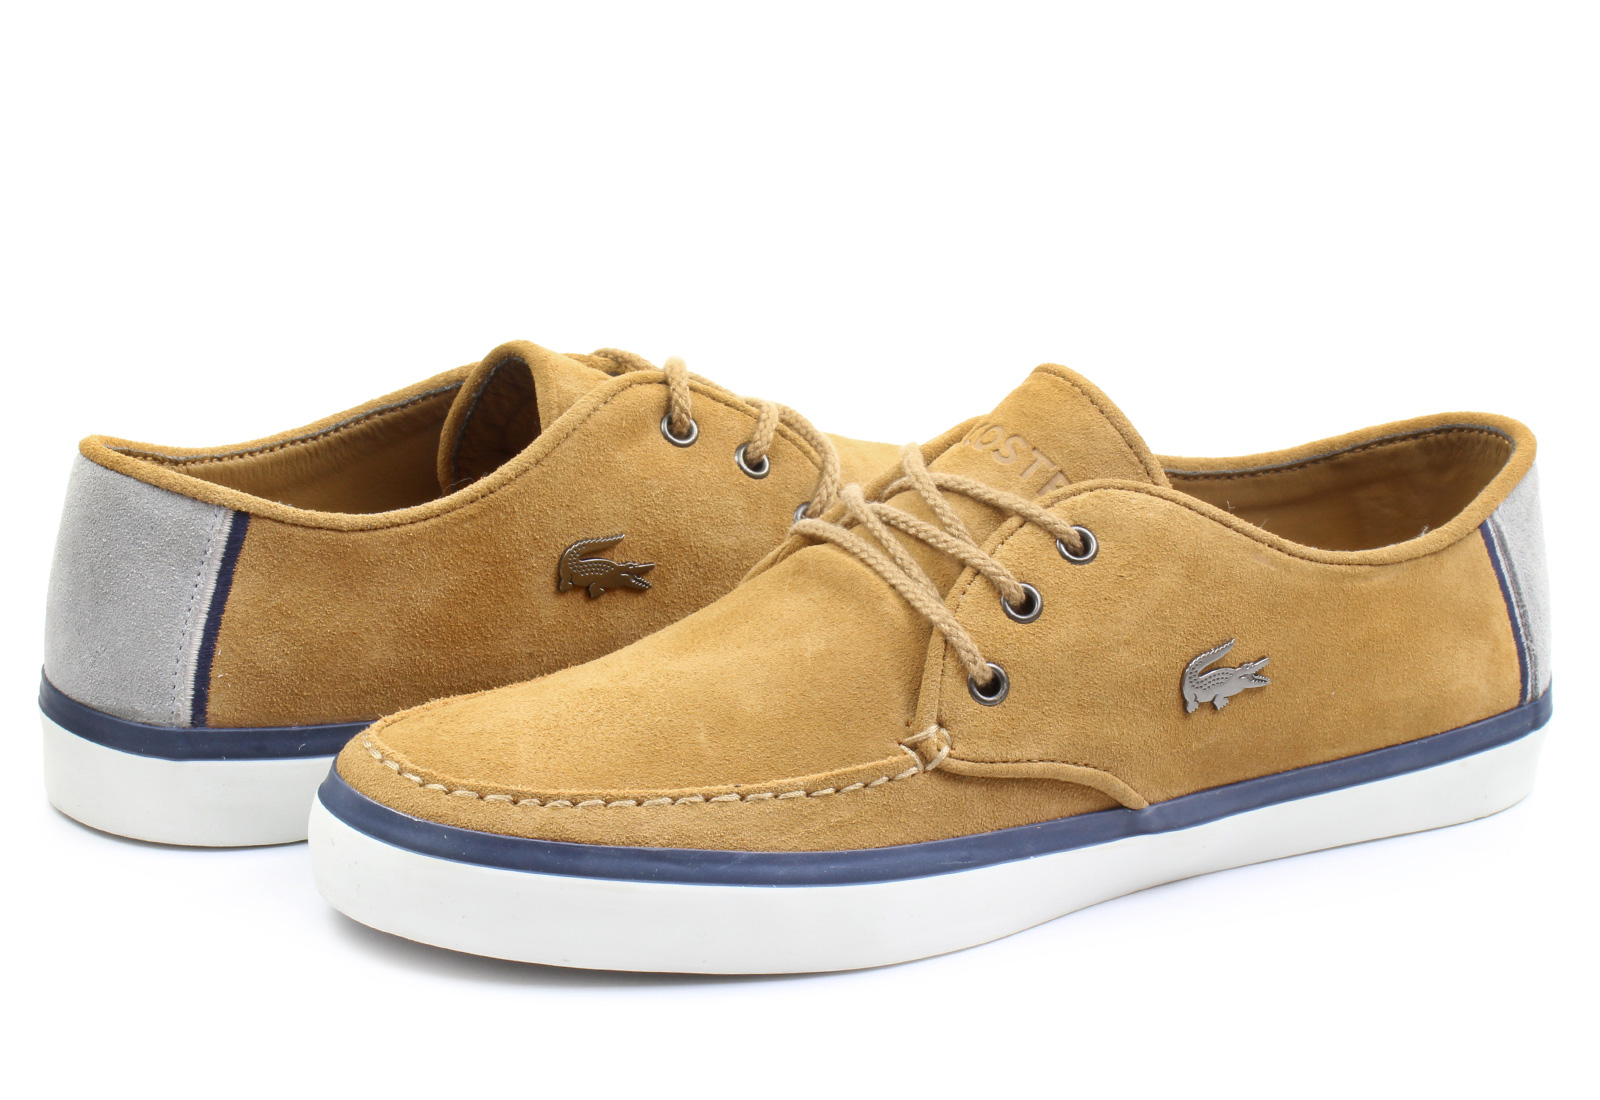 Lacoste Shoes - Sevrin - 152srm2418-158 - Online shop for sneakers ...